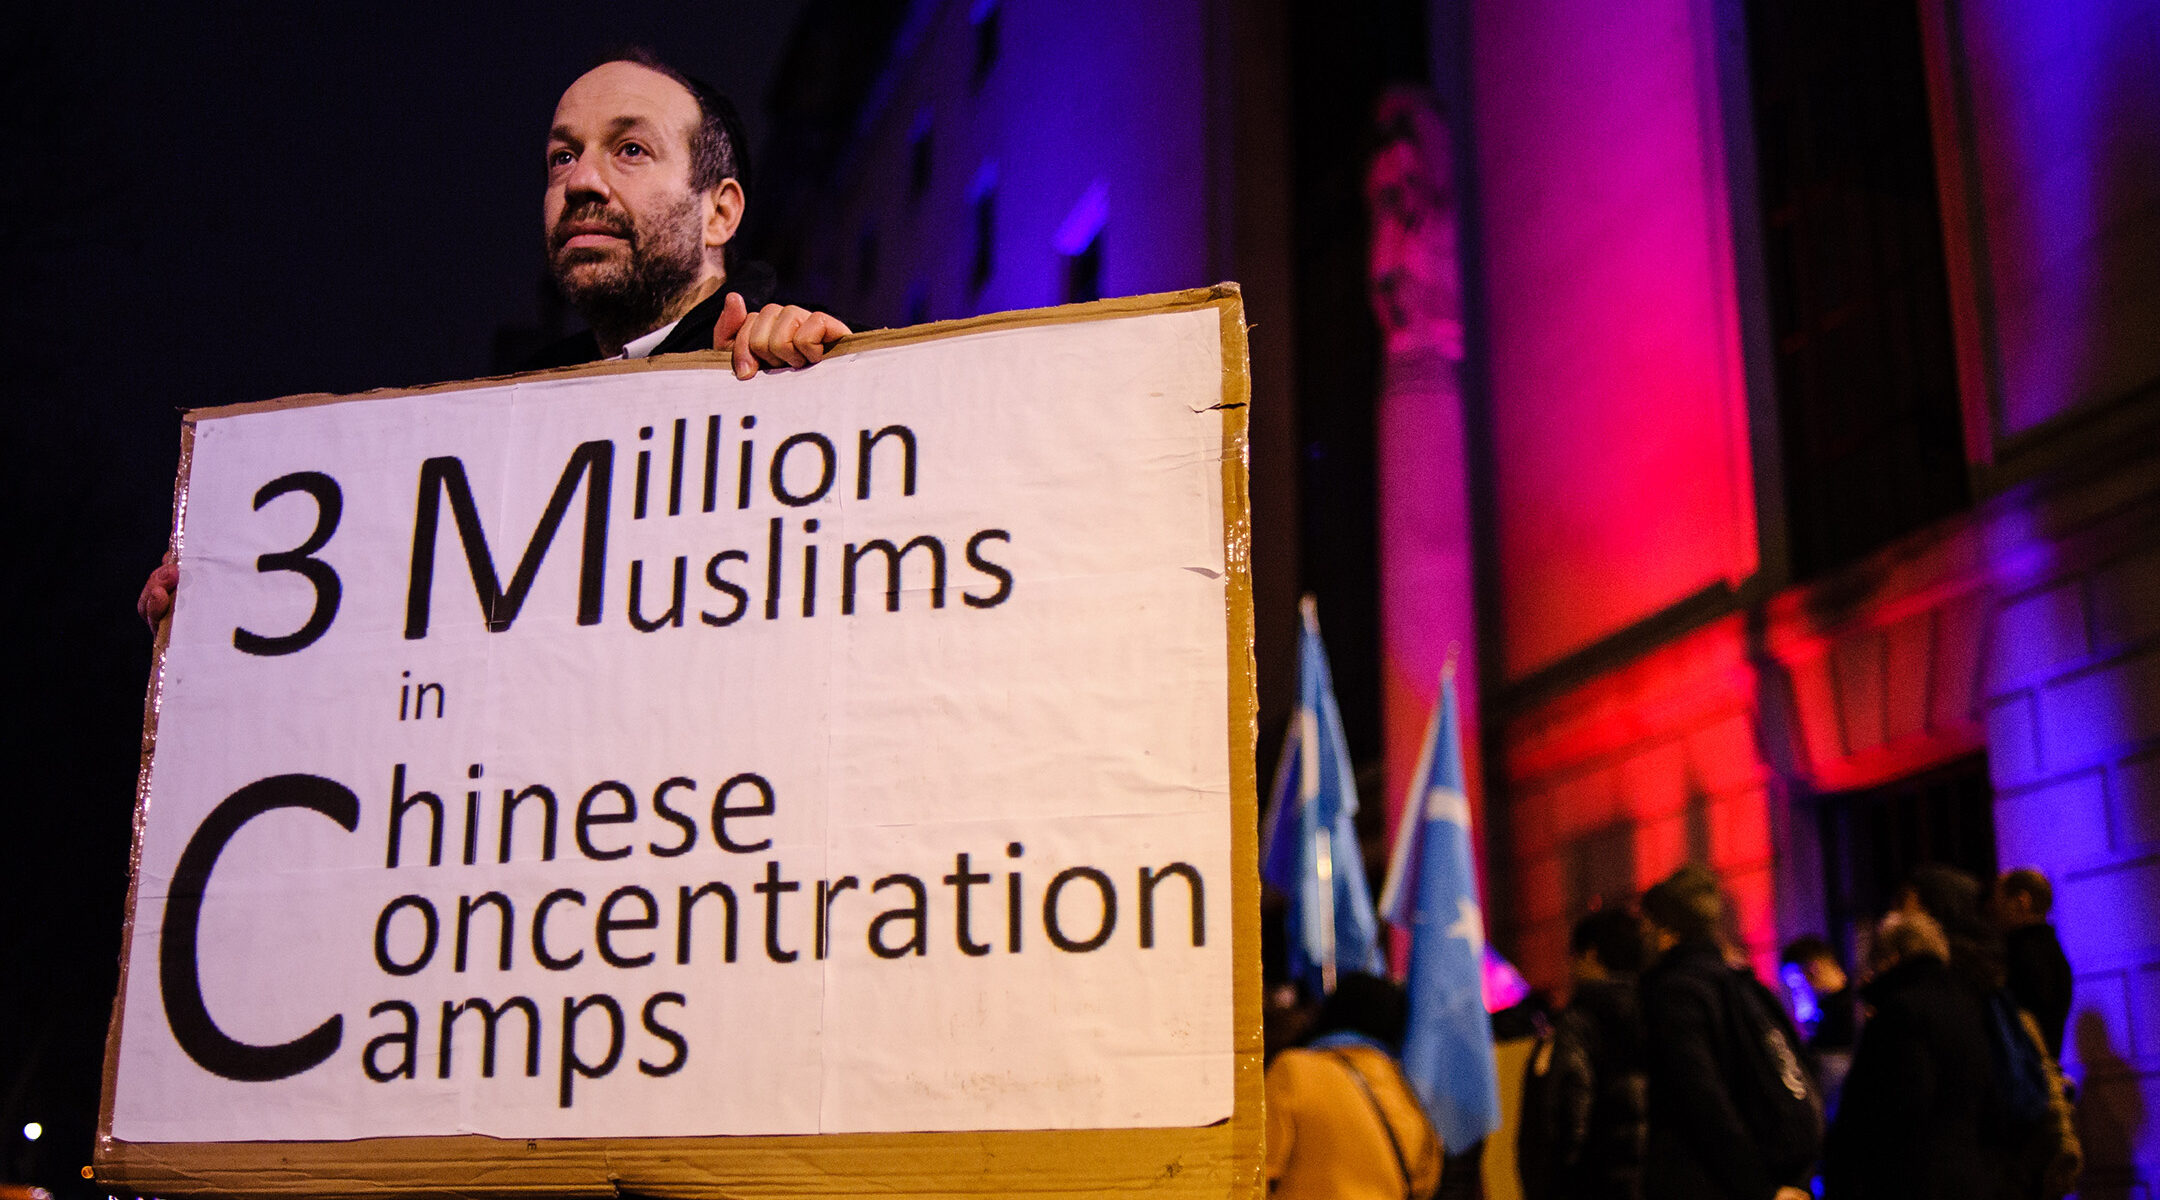 A Jewish man who identified himself as Andrew protests the oppression of China's Uyghurs outside the Chinese embassy in London, UK on Jan. 5, 2020. (David Cliff/NurPhoto via Getty Images)